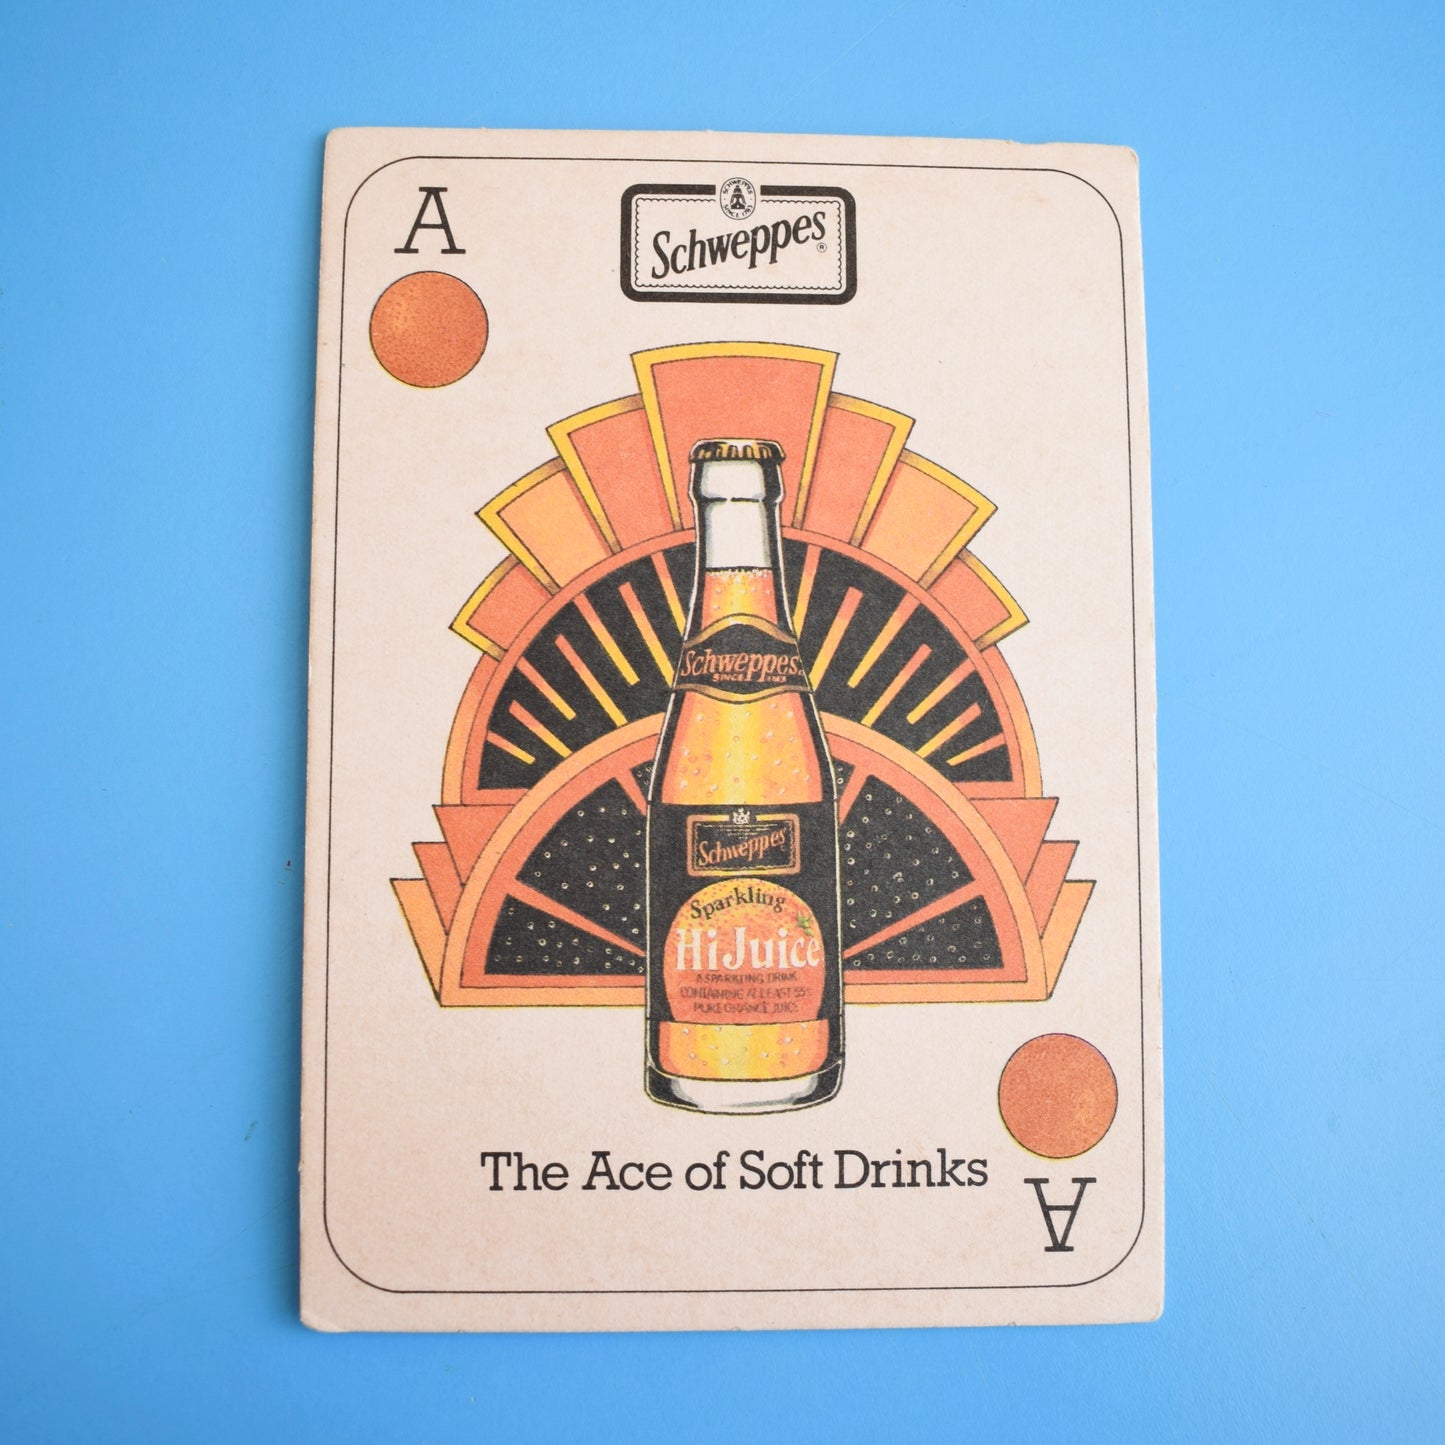 Vintage 1970s Schweppes Beer Mats- Anywhere in the World